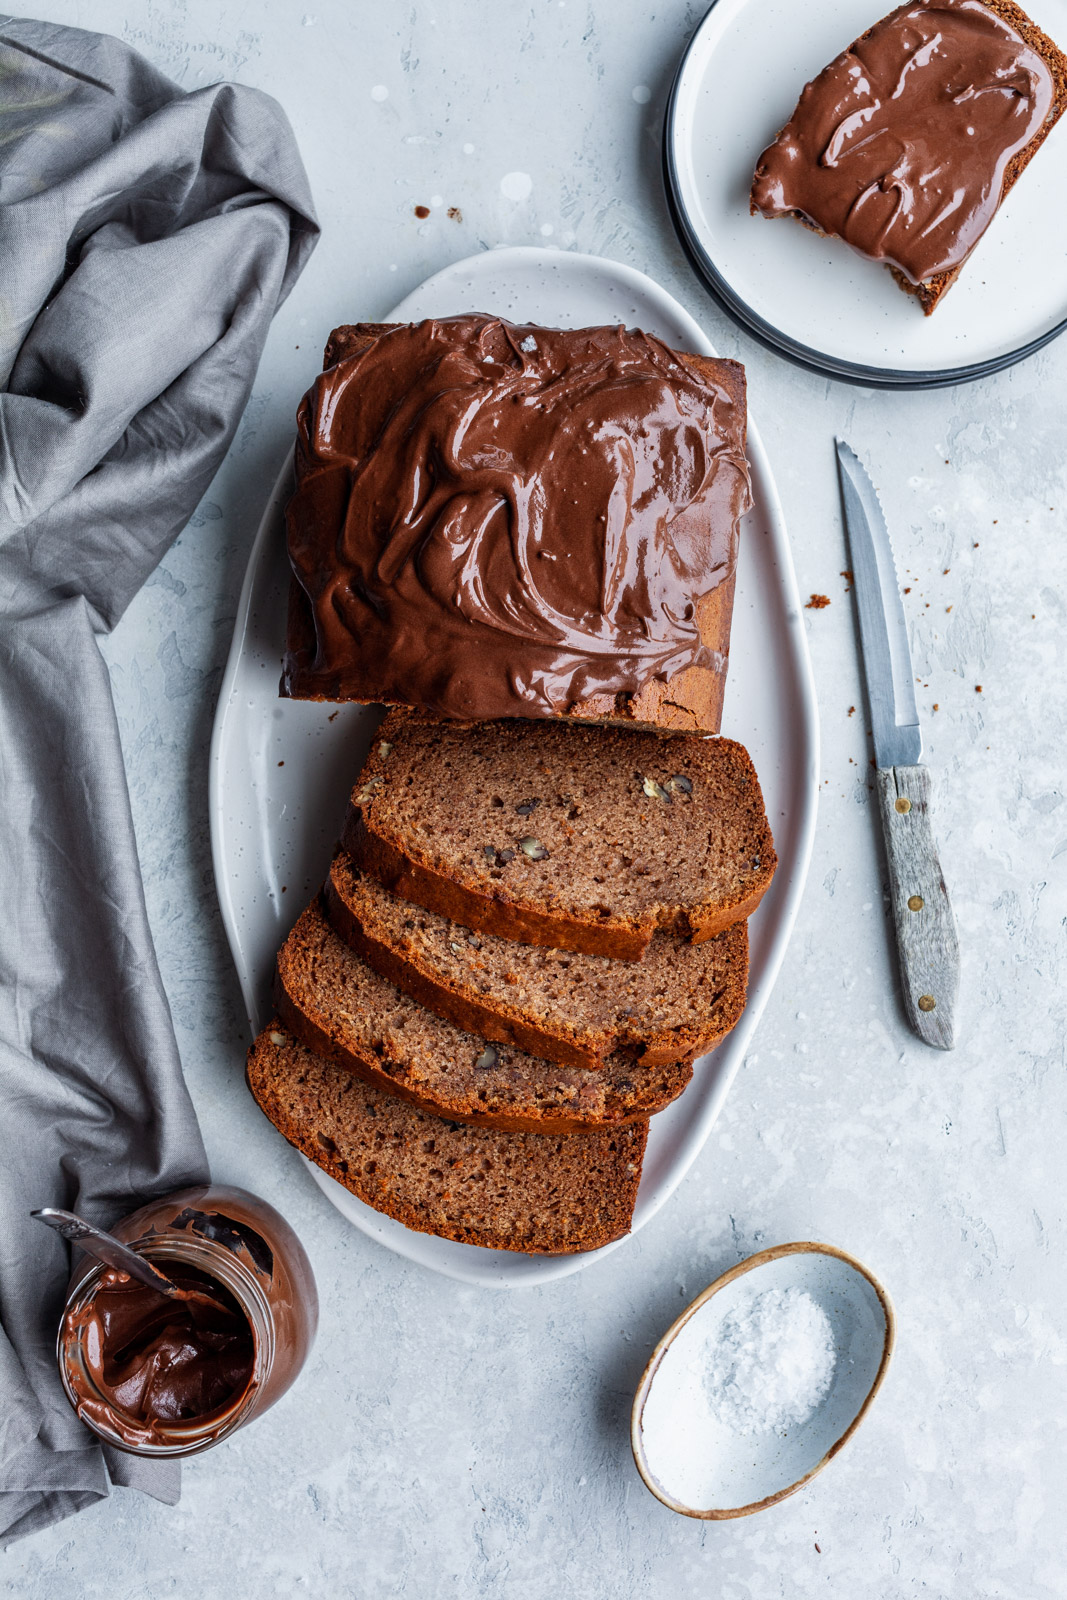 Chestnut Bread With A Brown Butter Chocolate Whipped Ganache